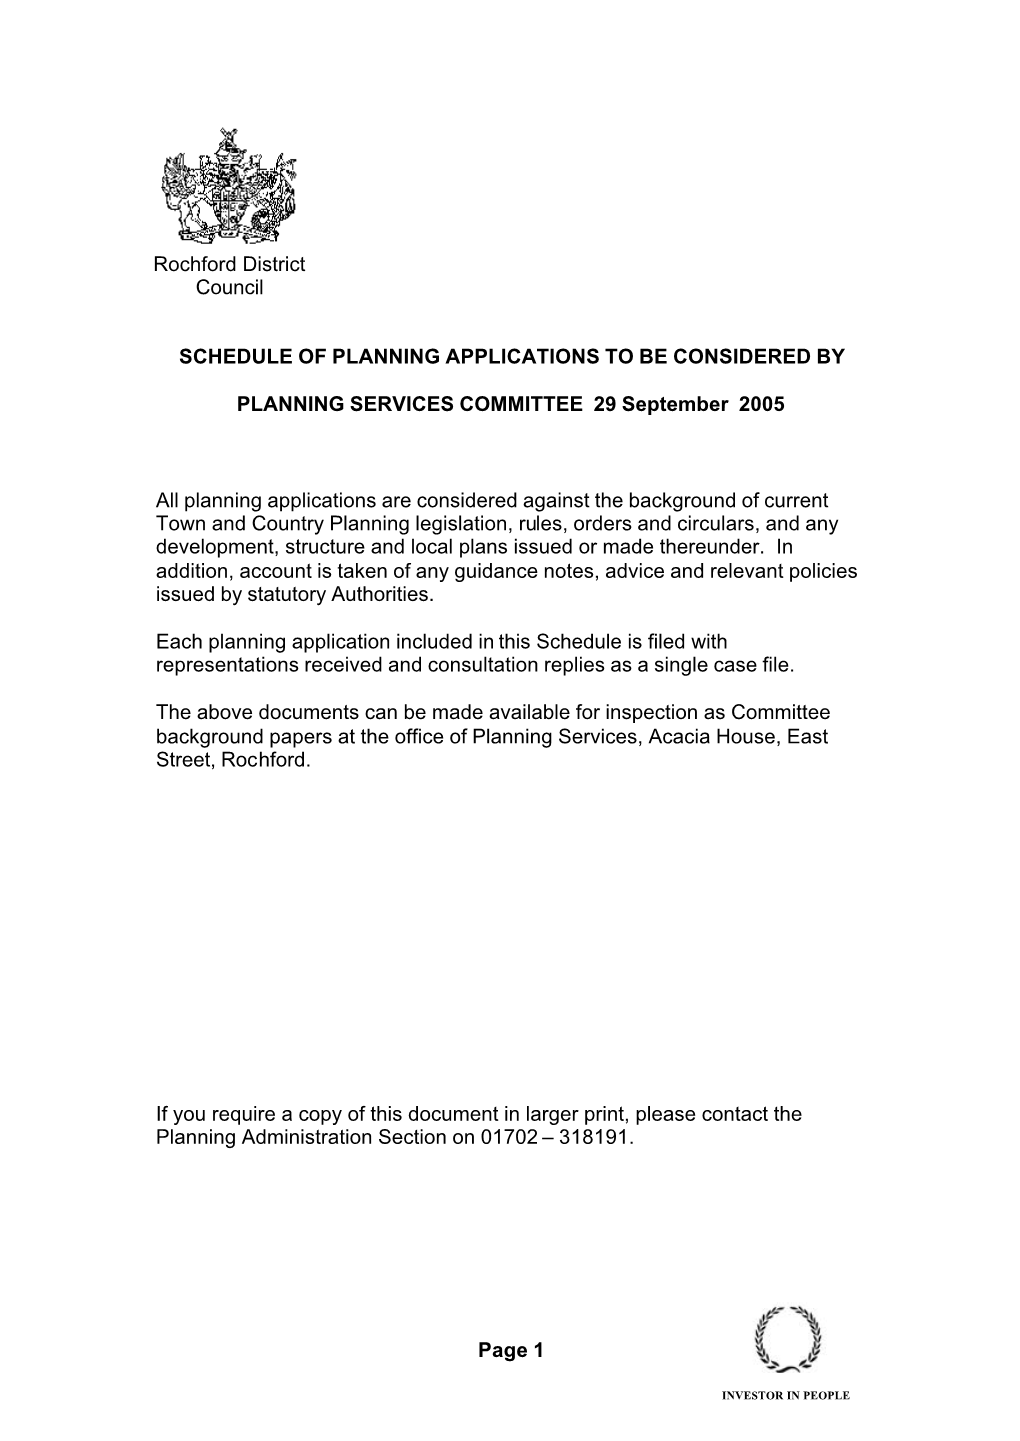 Planning Services Committee 290905